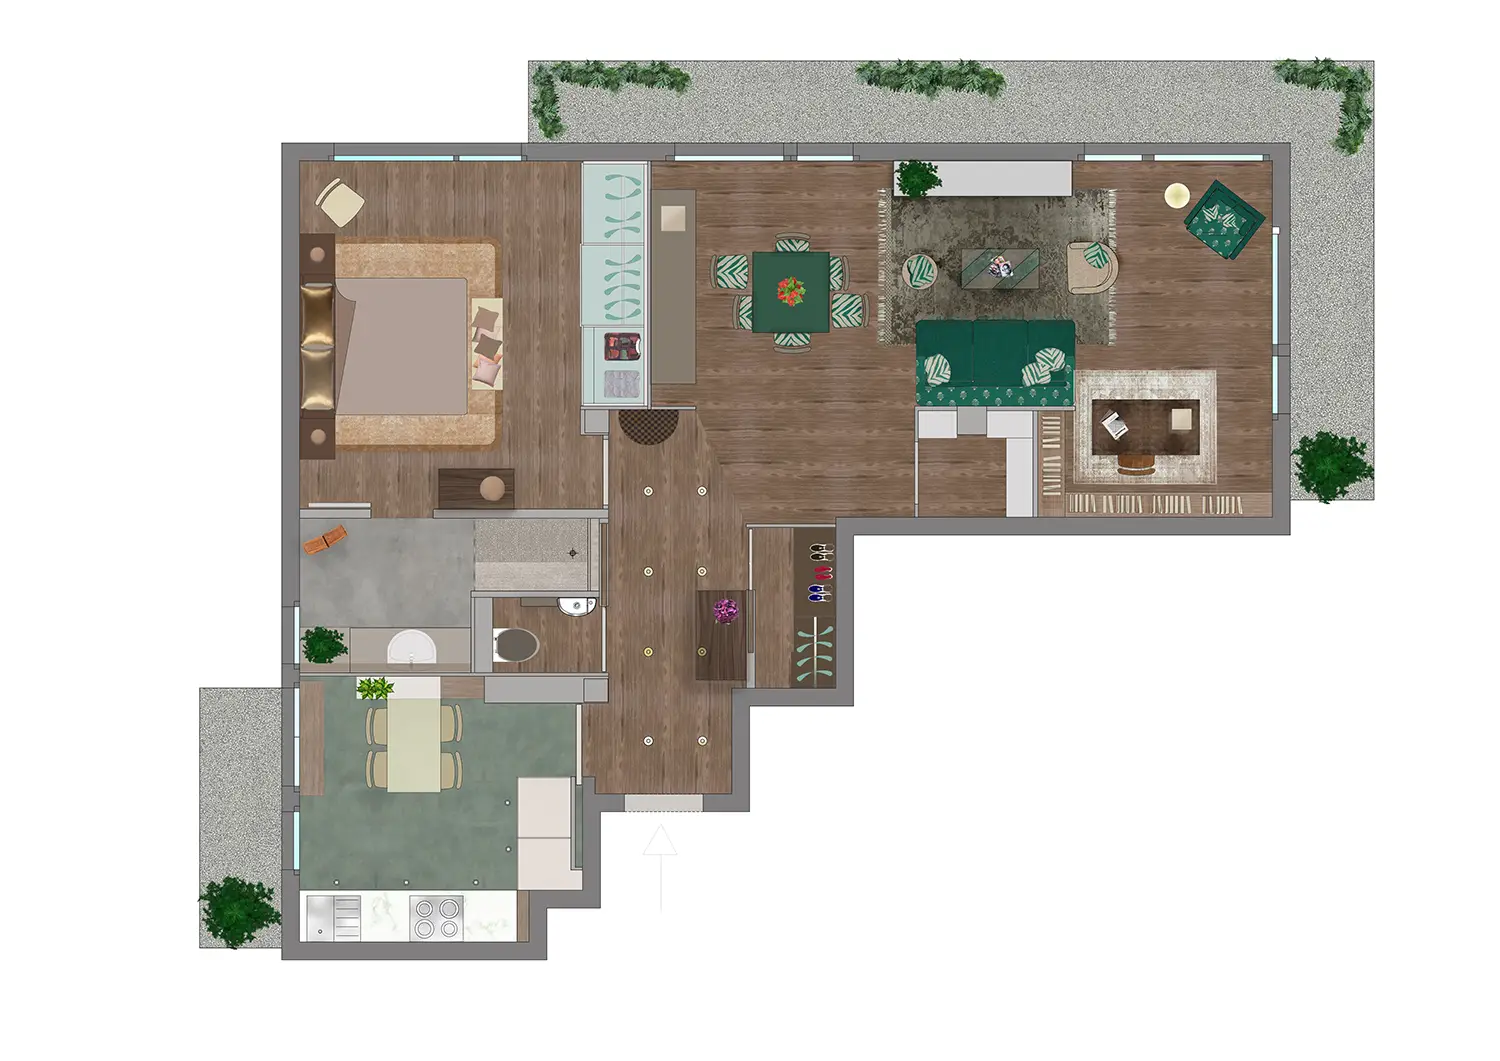 2D top view of a renovation project curated by studio Elles Interior Design. The floor plan is colored to give both an idea of the distribution of space and color choices.